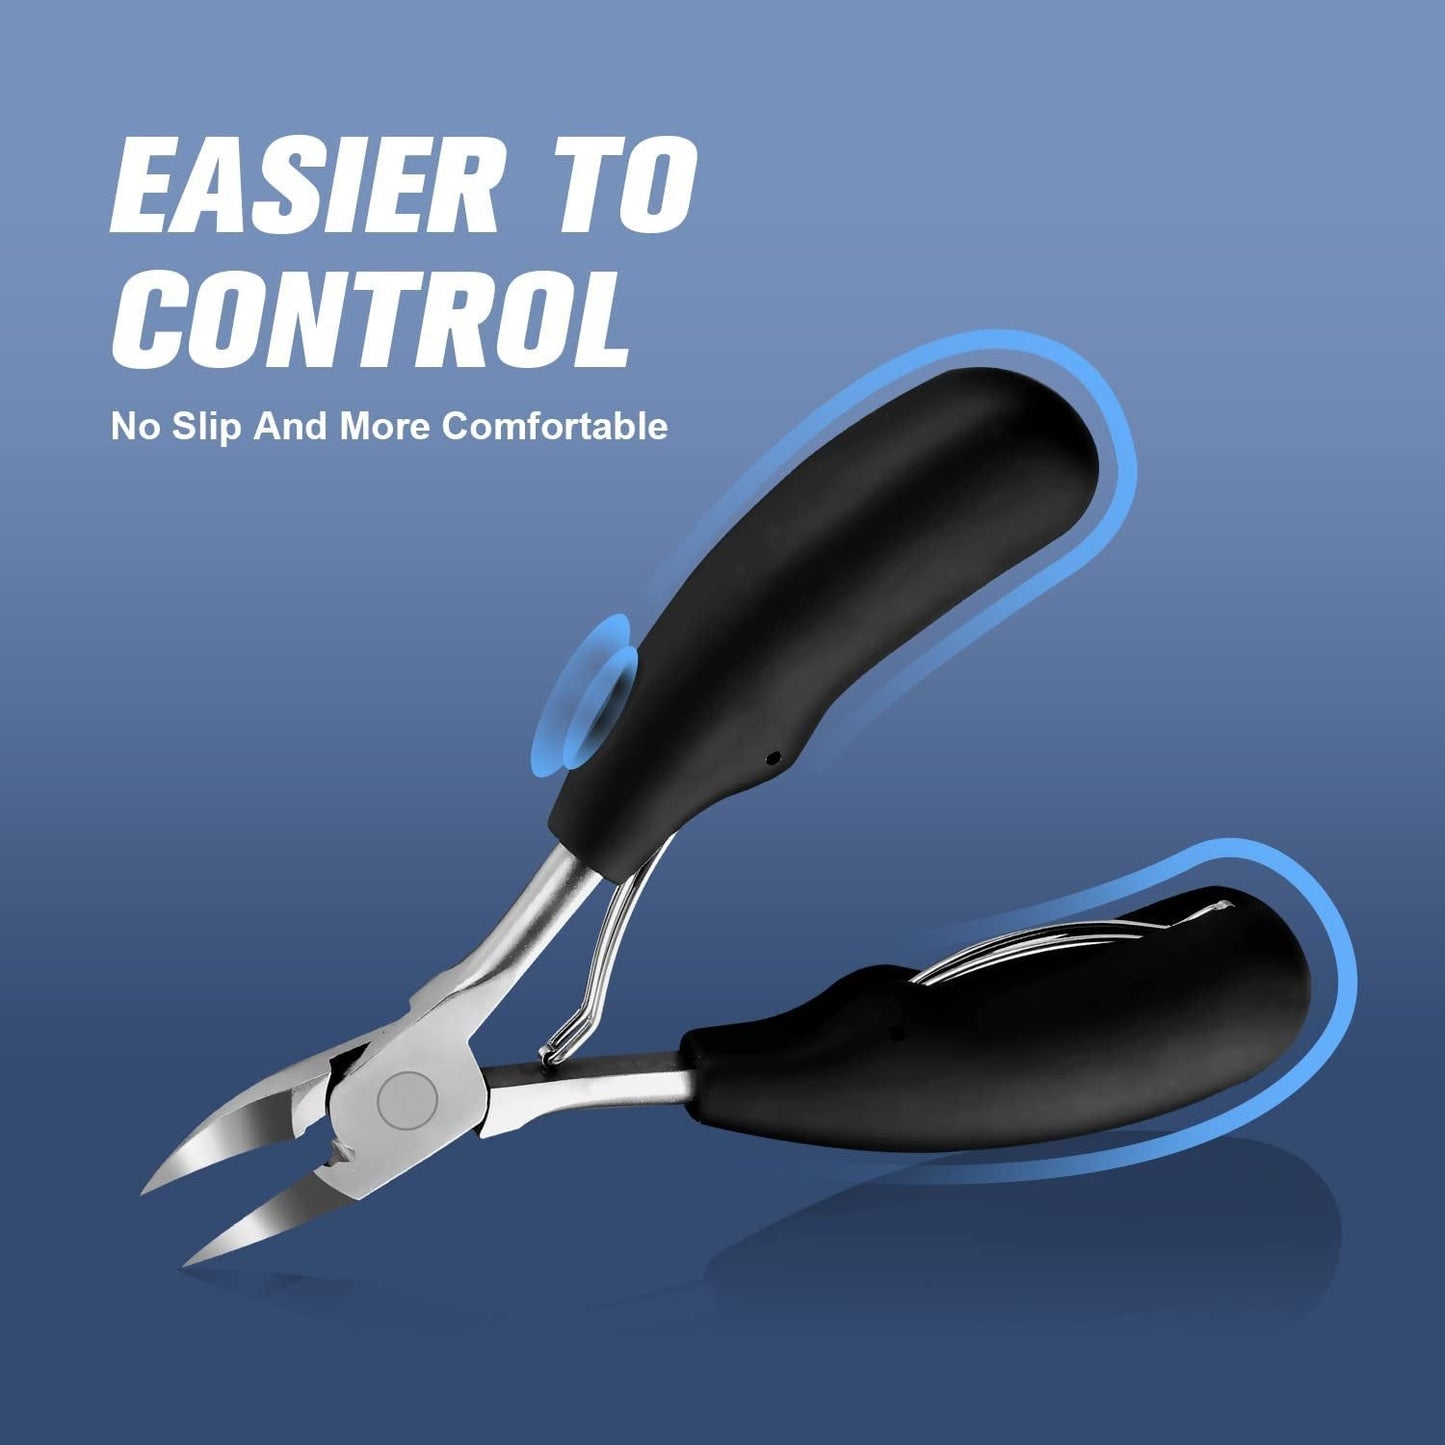 🔥Last day limited time offer 50% OFF🔥Professional Nail Clipper Kit